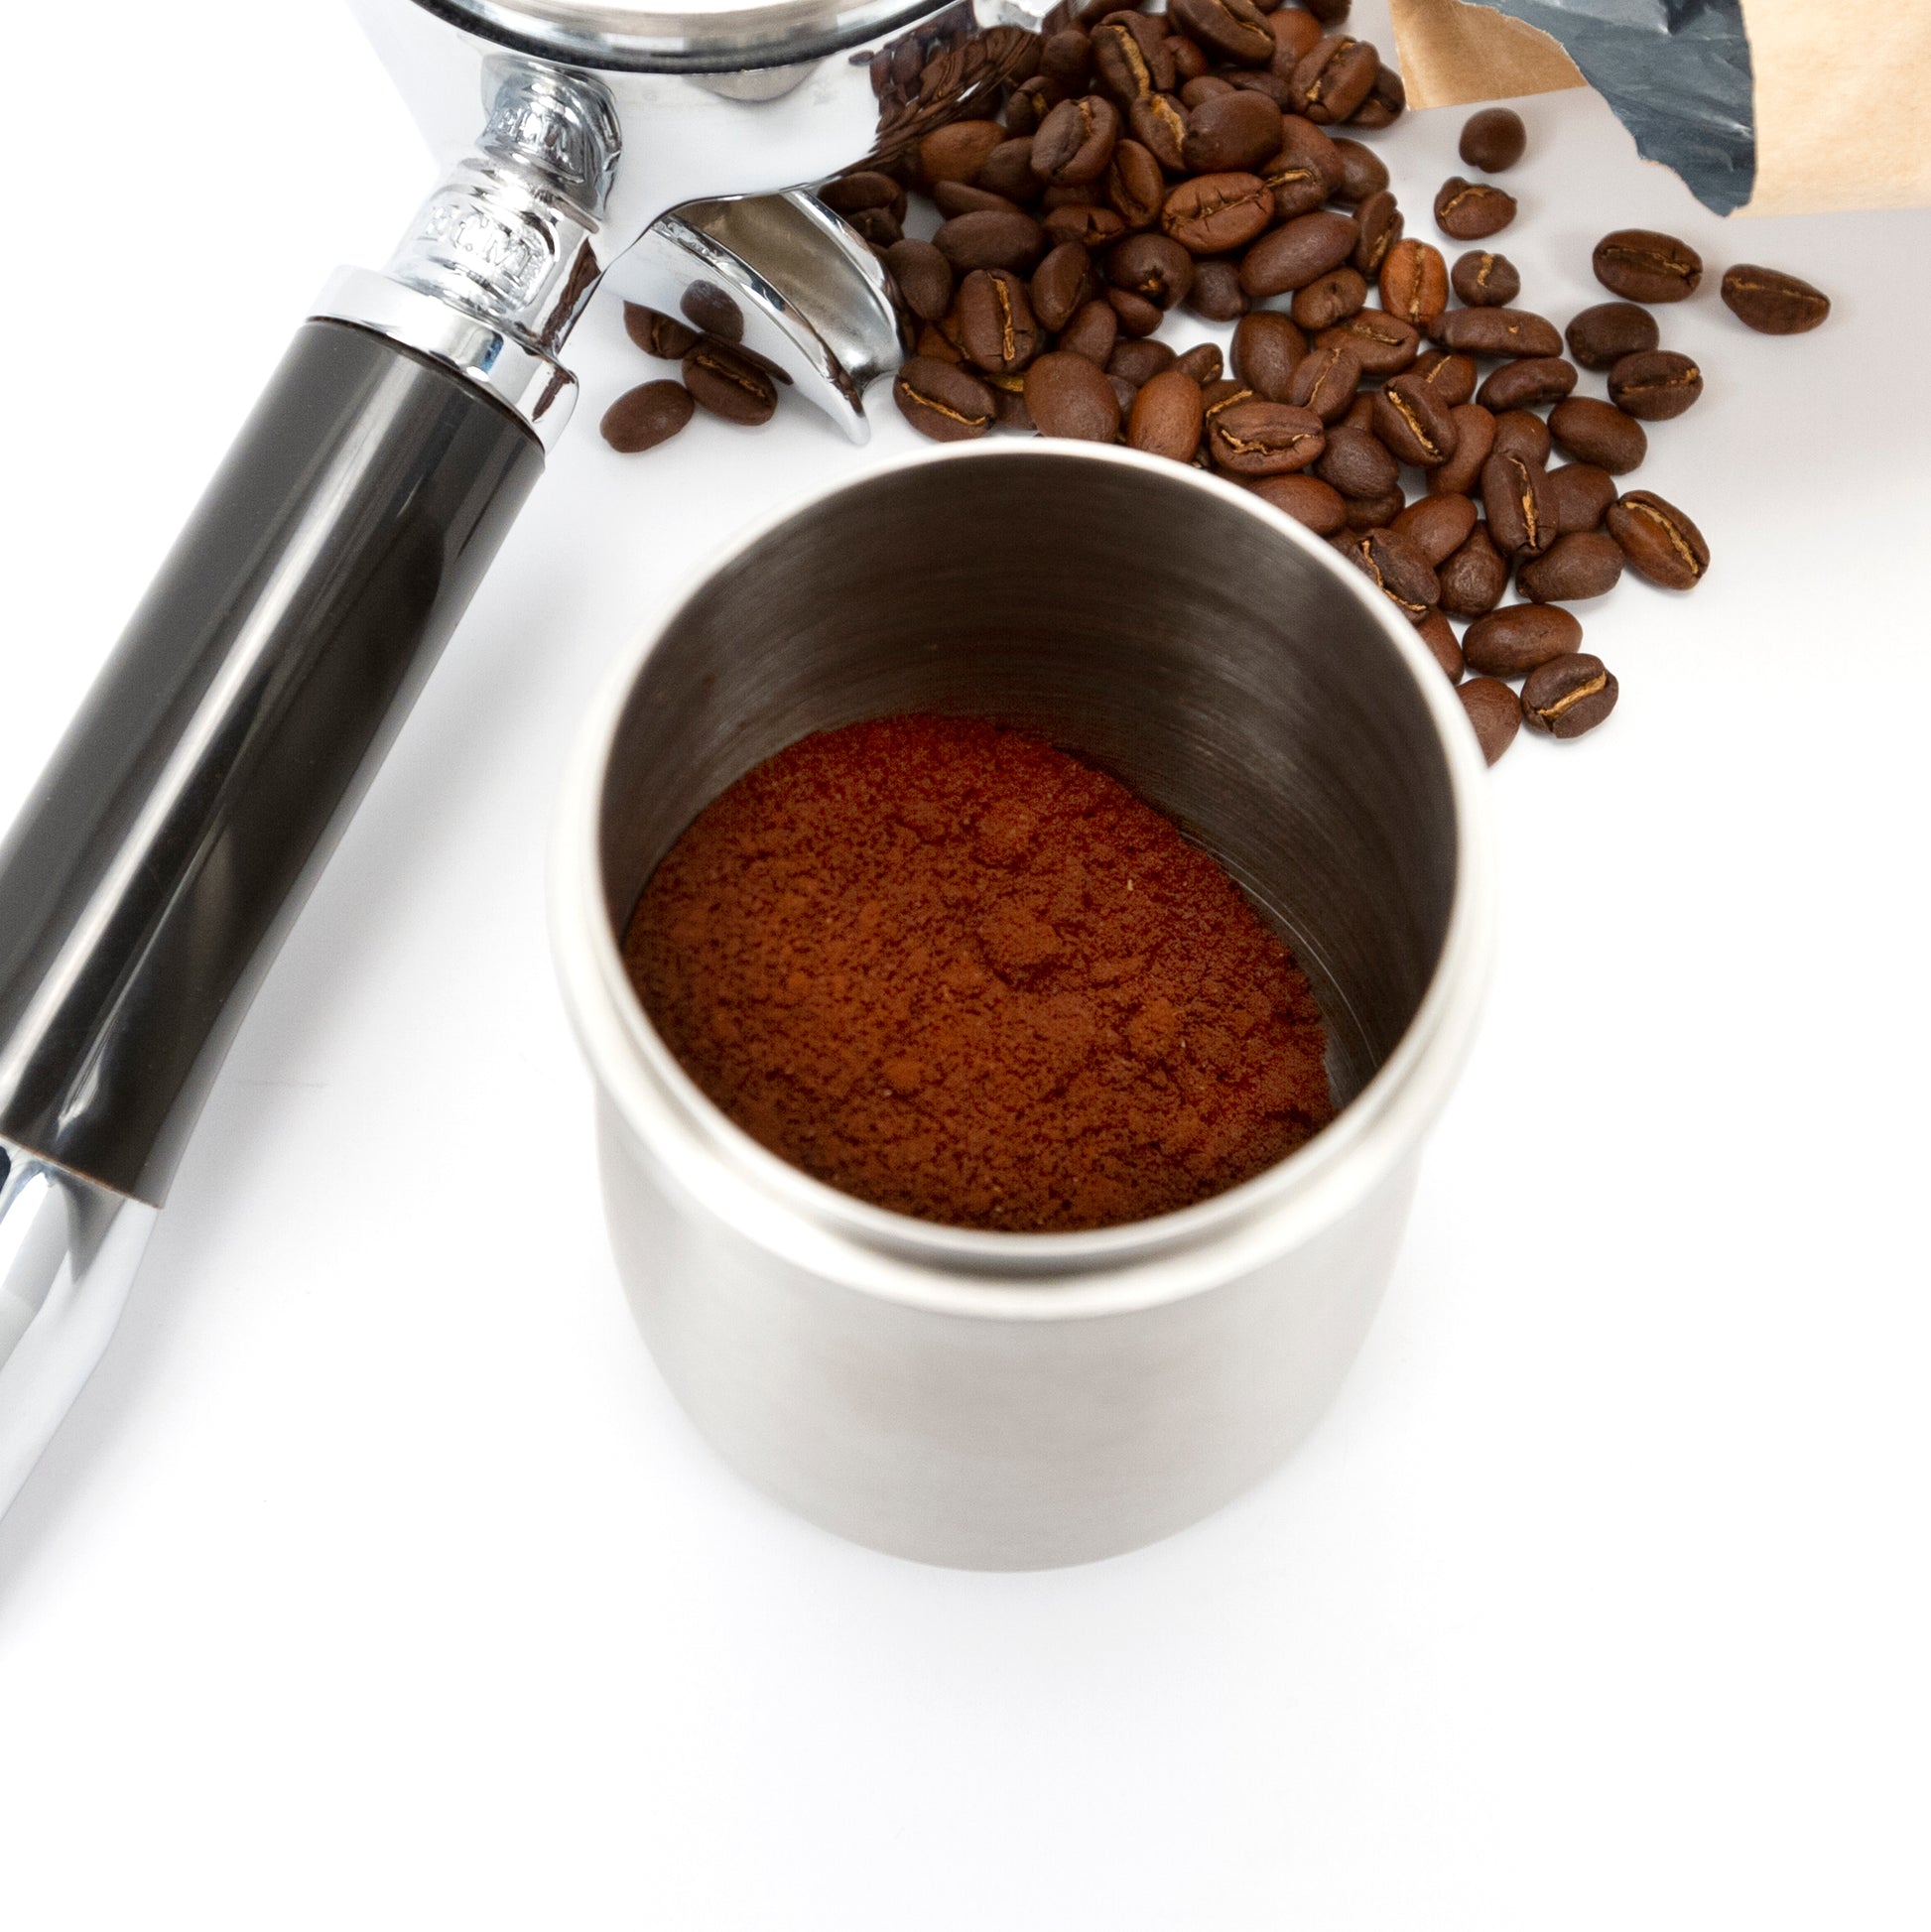 HAND SHAKER FOR COFFEE GRINDS